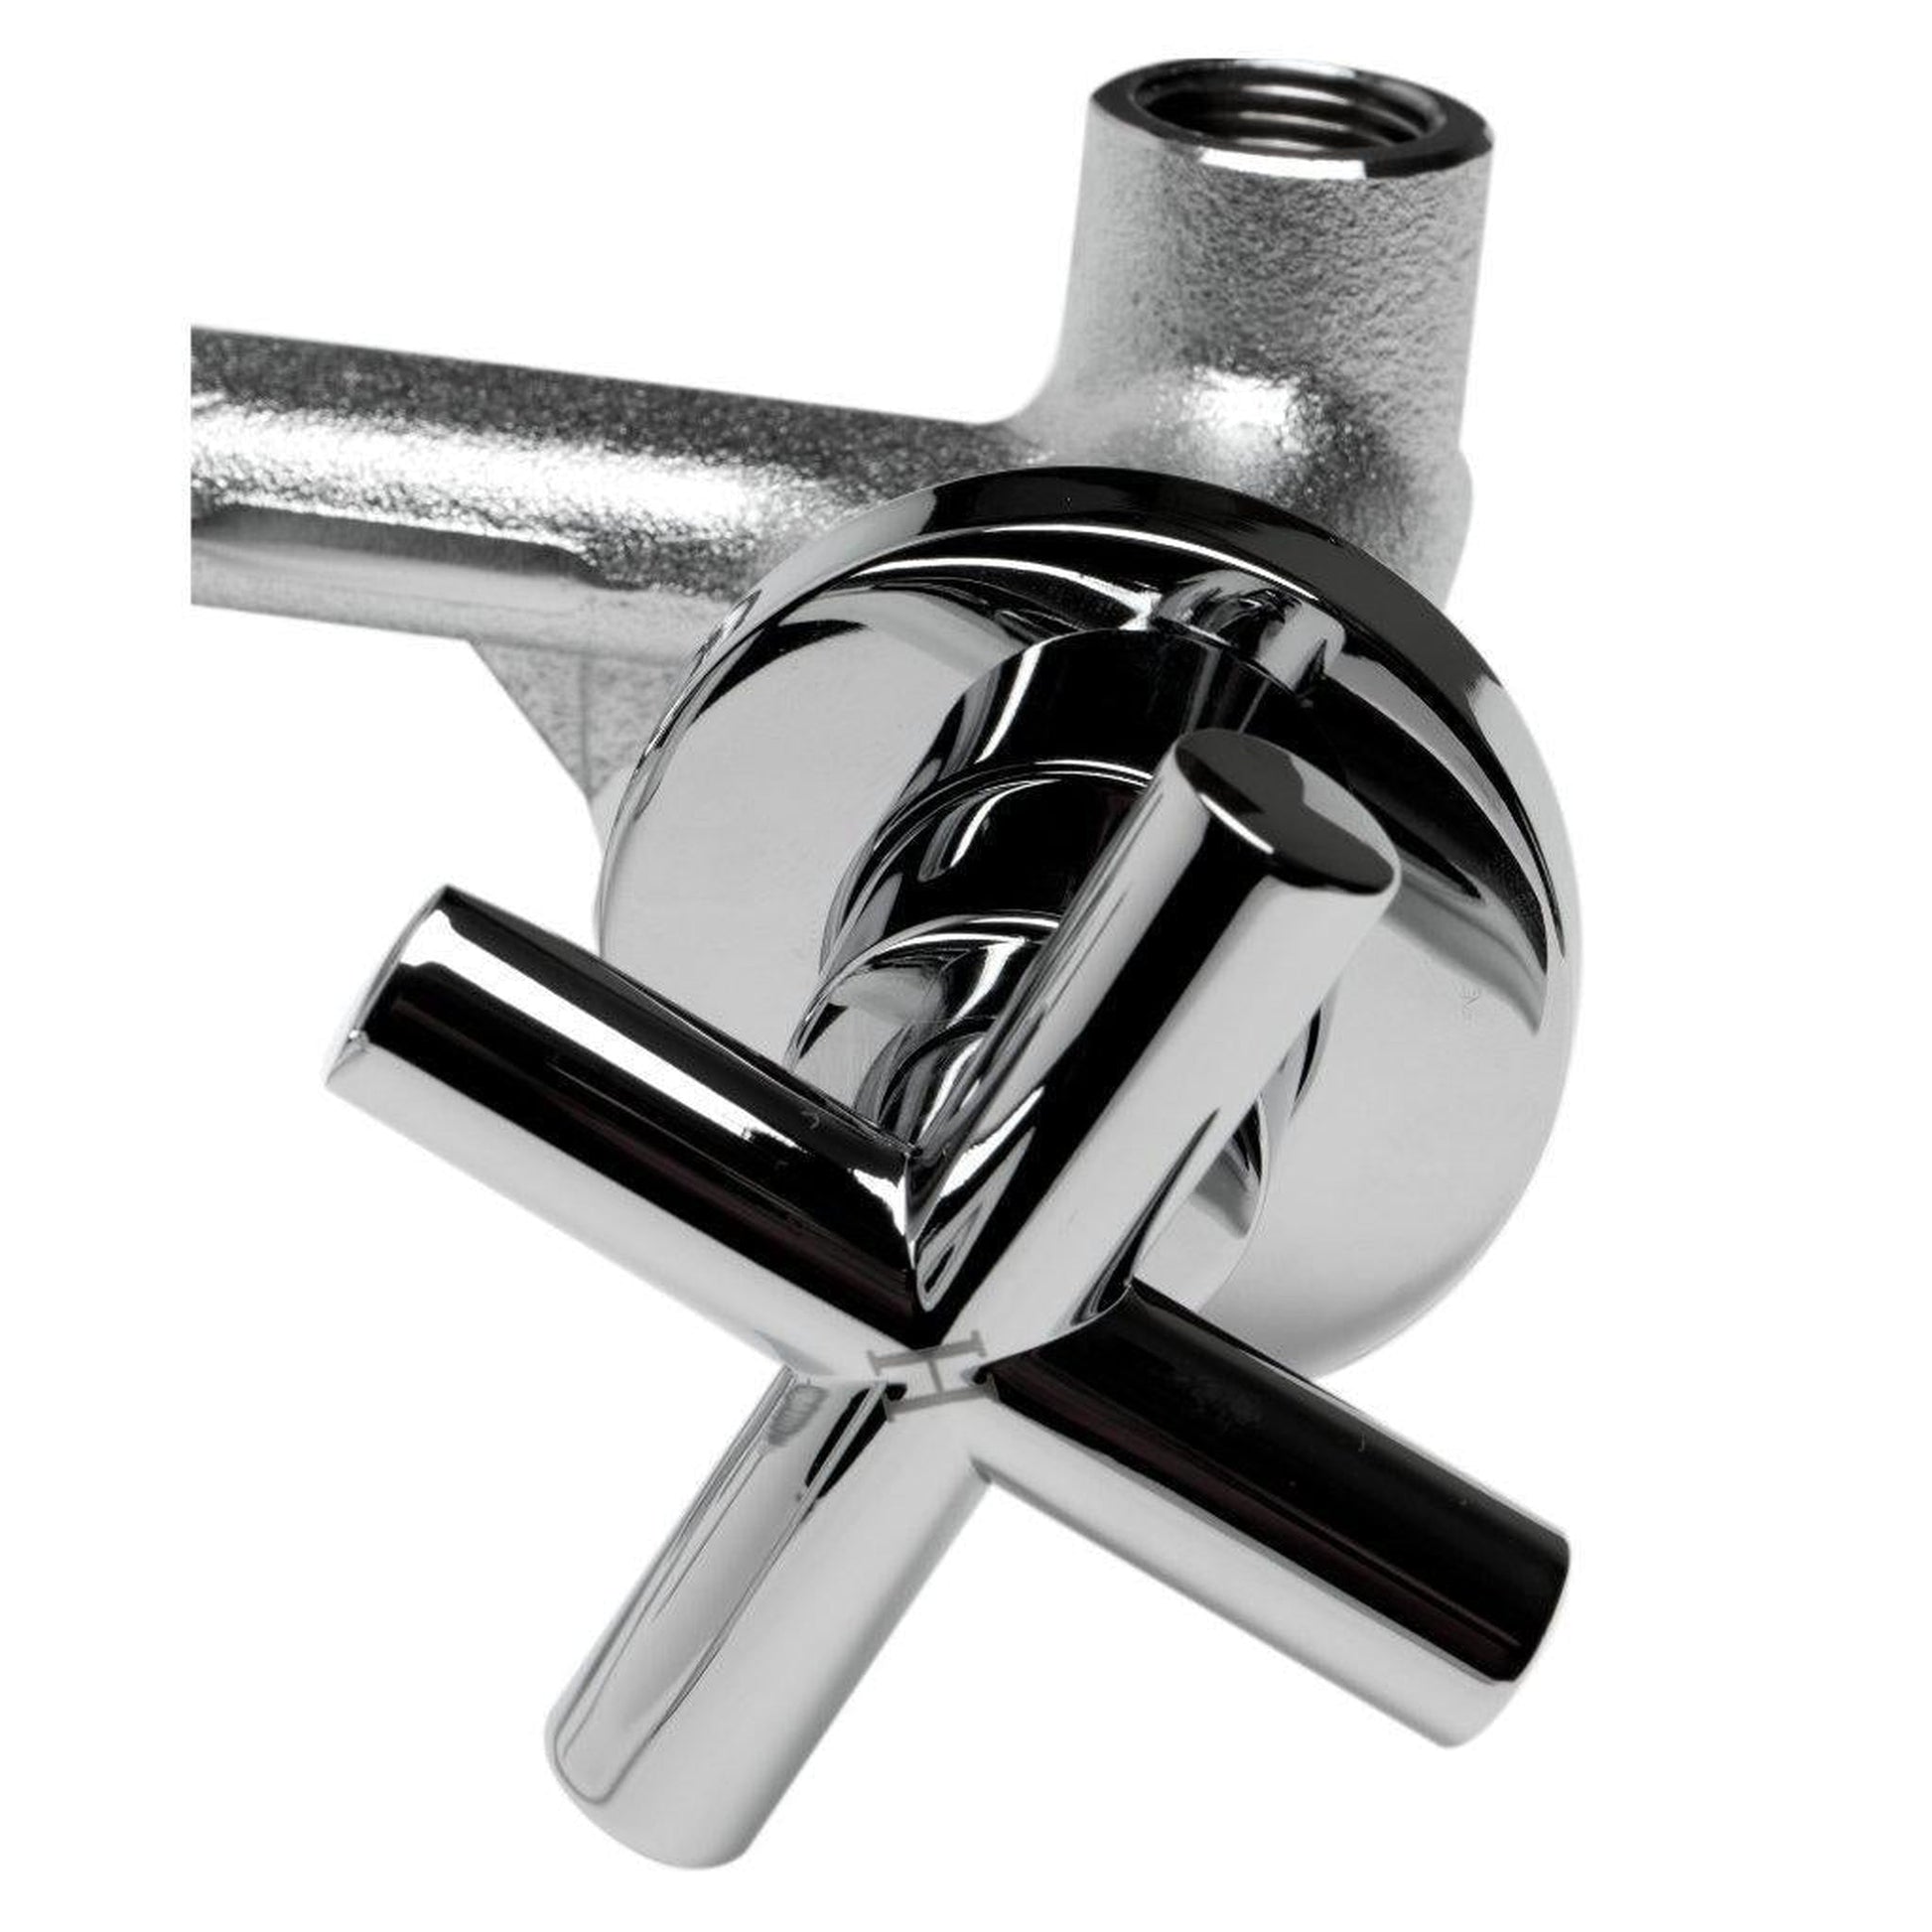 ALFI Brand AB1035-PC Polished Chrome Wall-Mounted Widespread Round Brass Bathroom Sink Faucet With Two Cross Handles